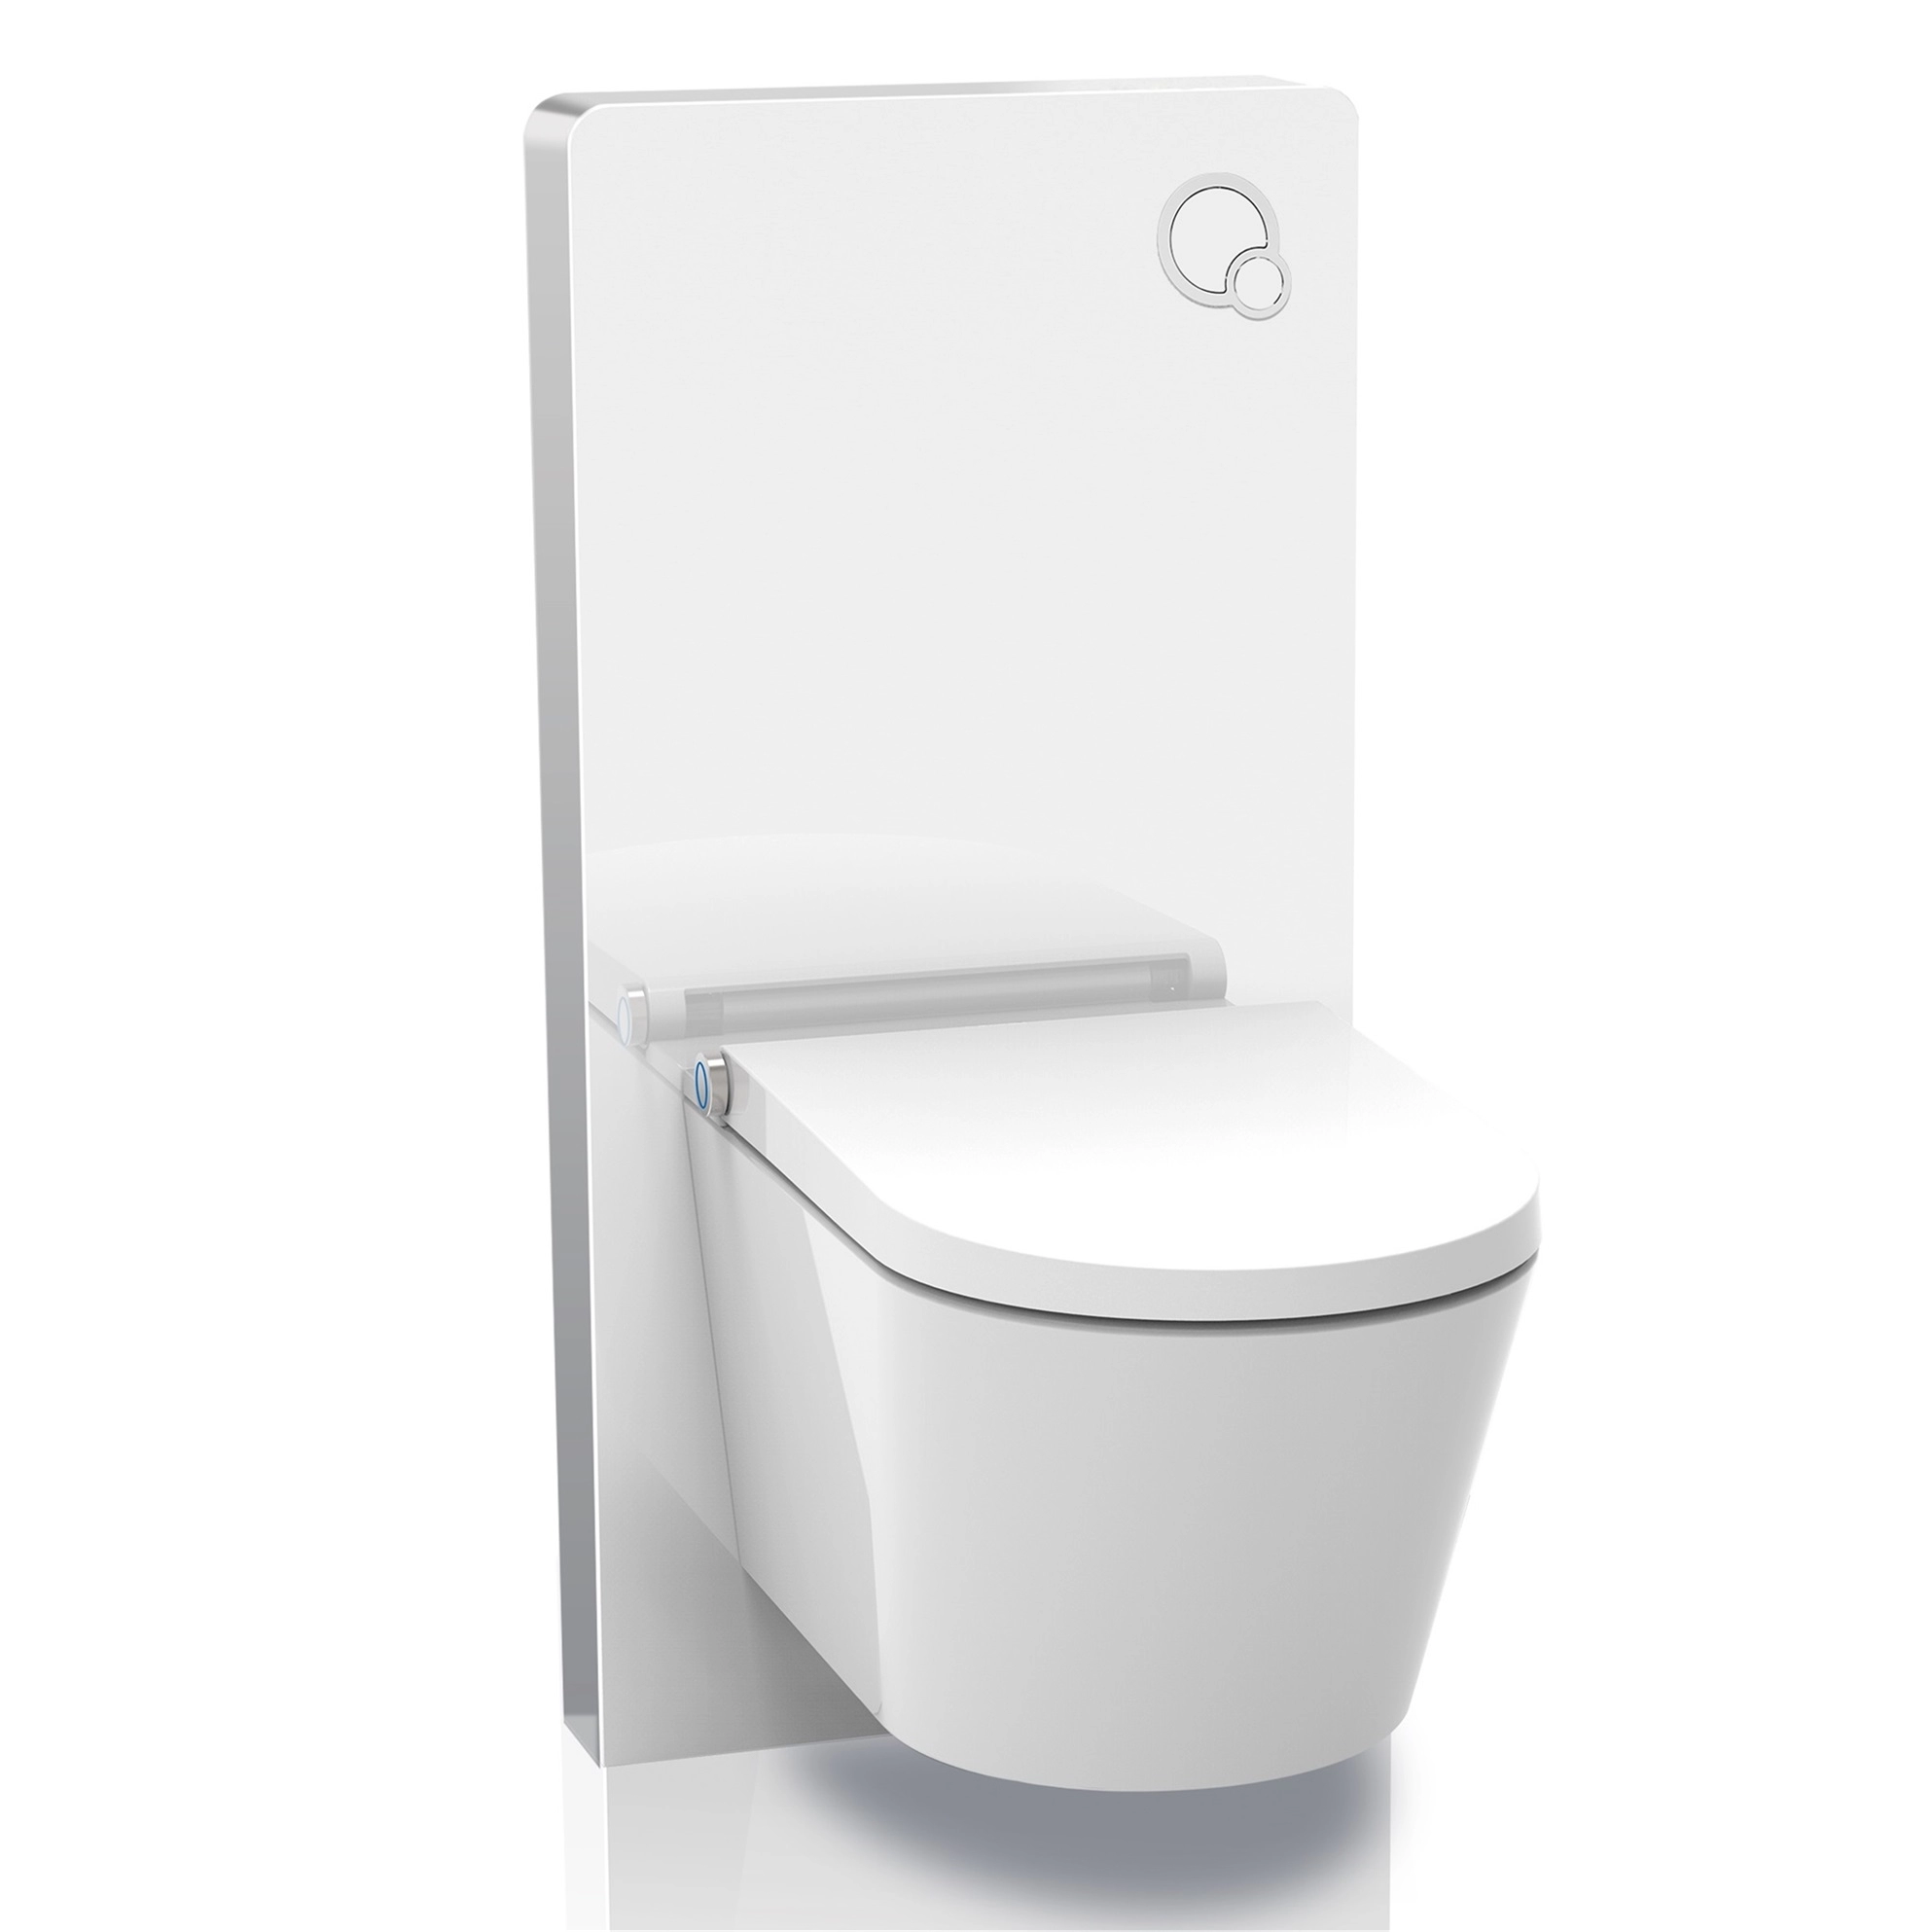 Smart toilet with induction flushing system for a comfortable shower